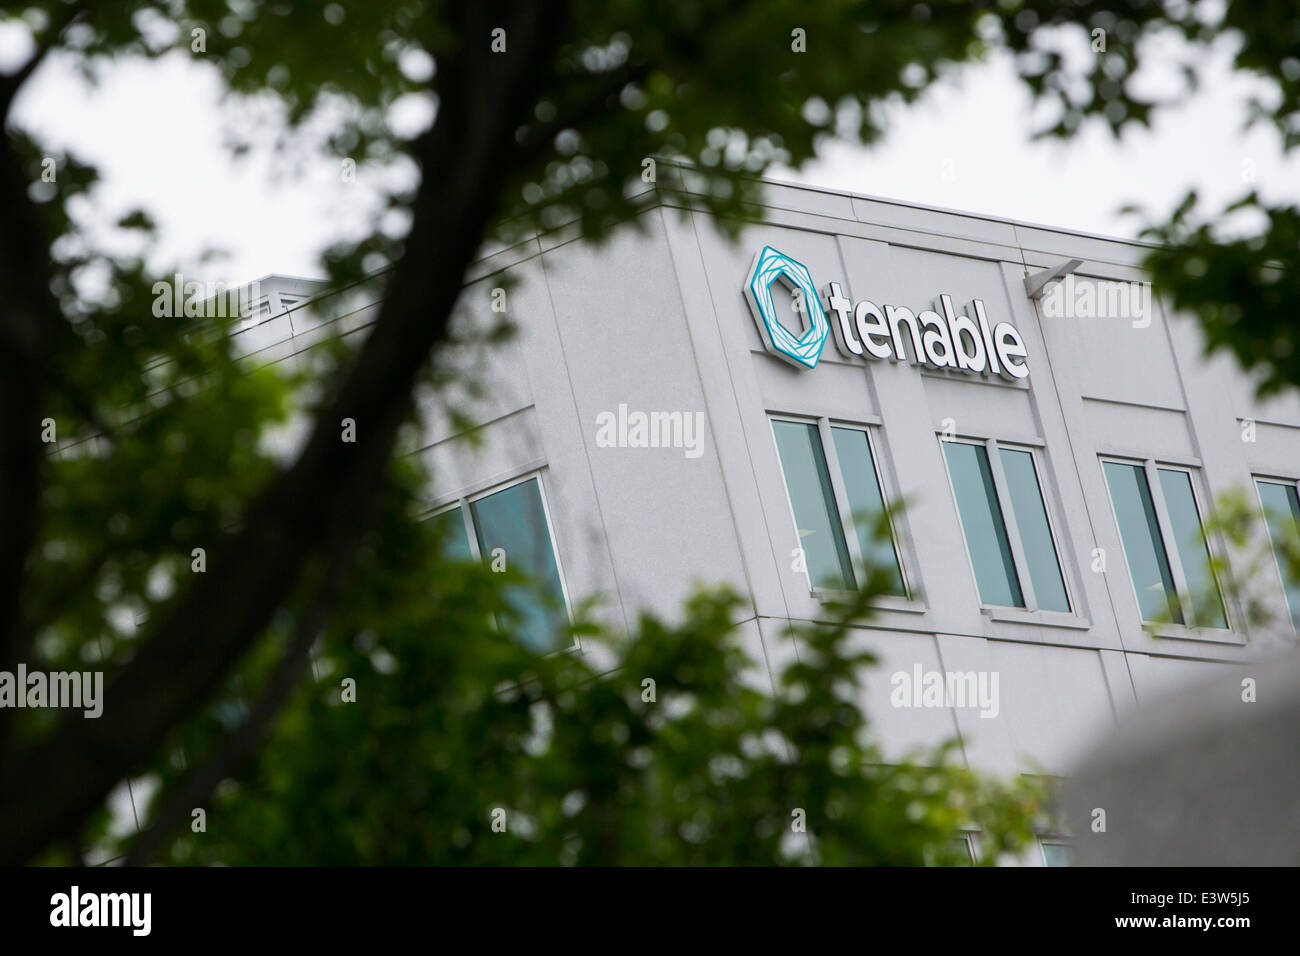 The headquarters of the network security firm Tenable in Columbia, Maryland. Stock Photo